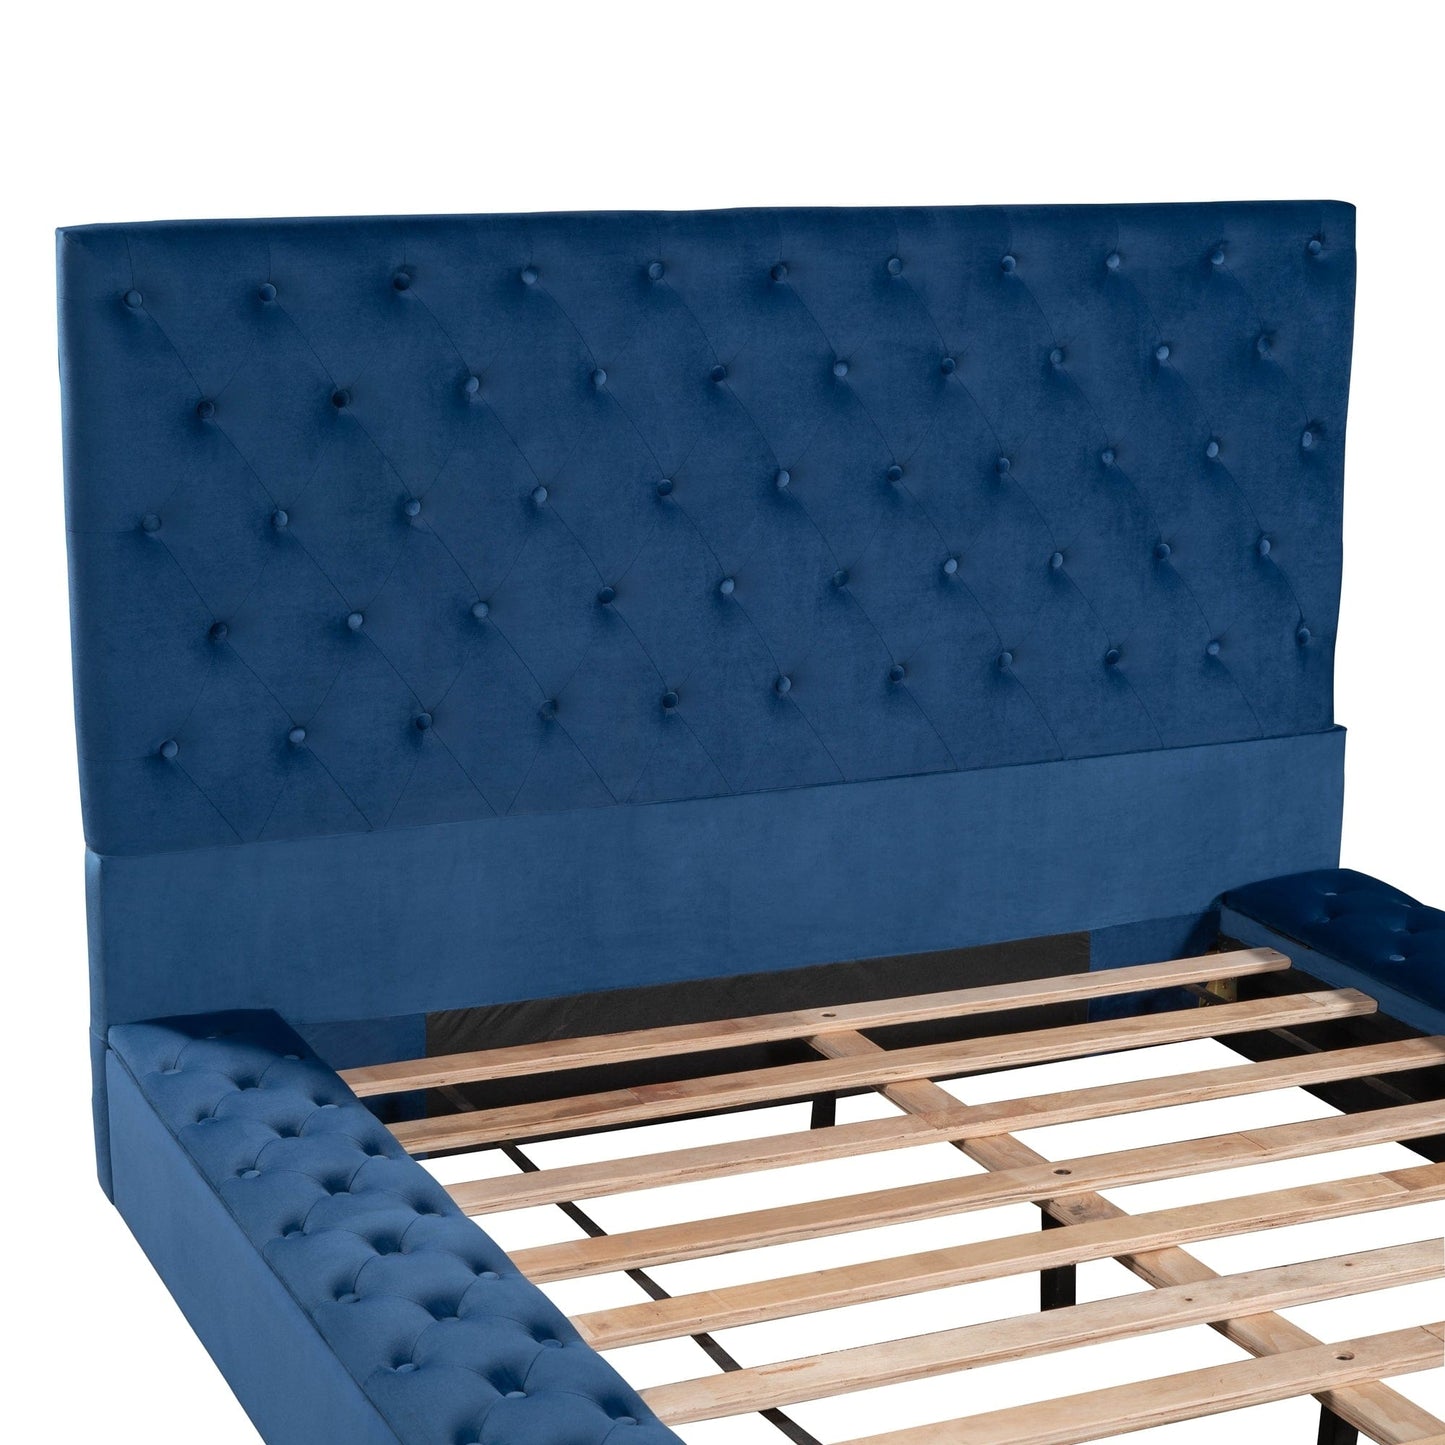 Queen Size Upholstery Low Profile Storage Platform Bed with Storage Space on both Sides and Footboard,Blue